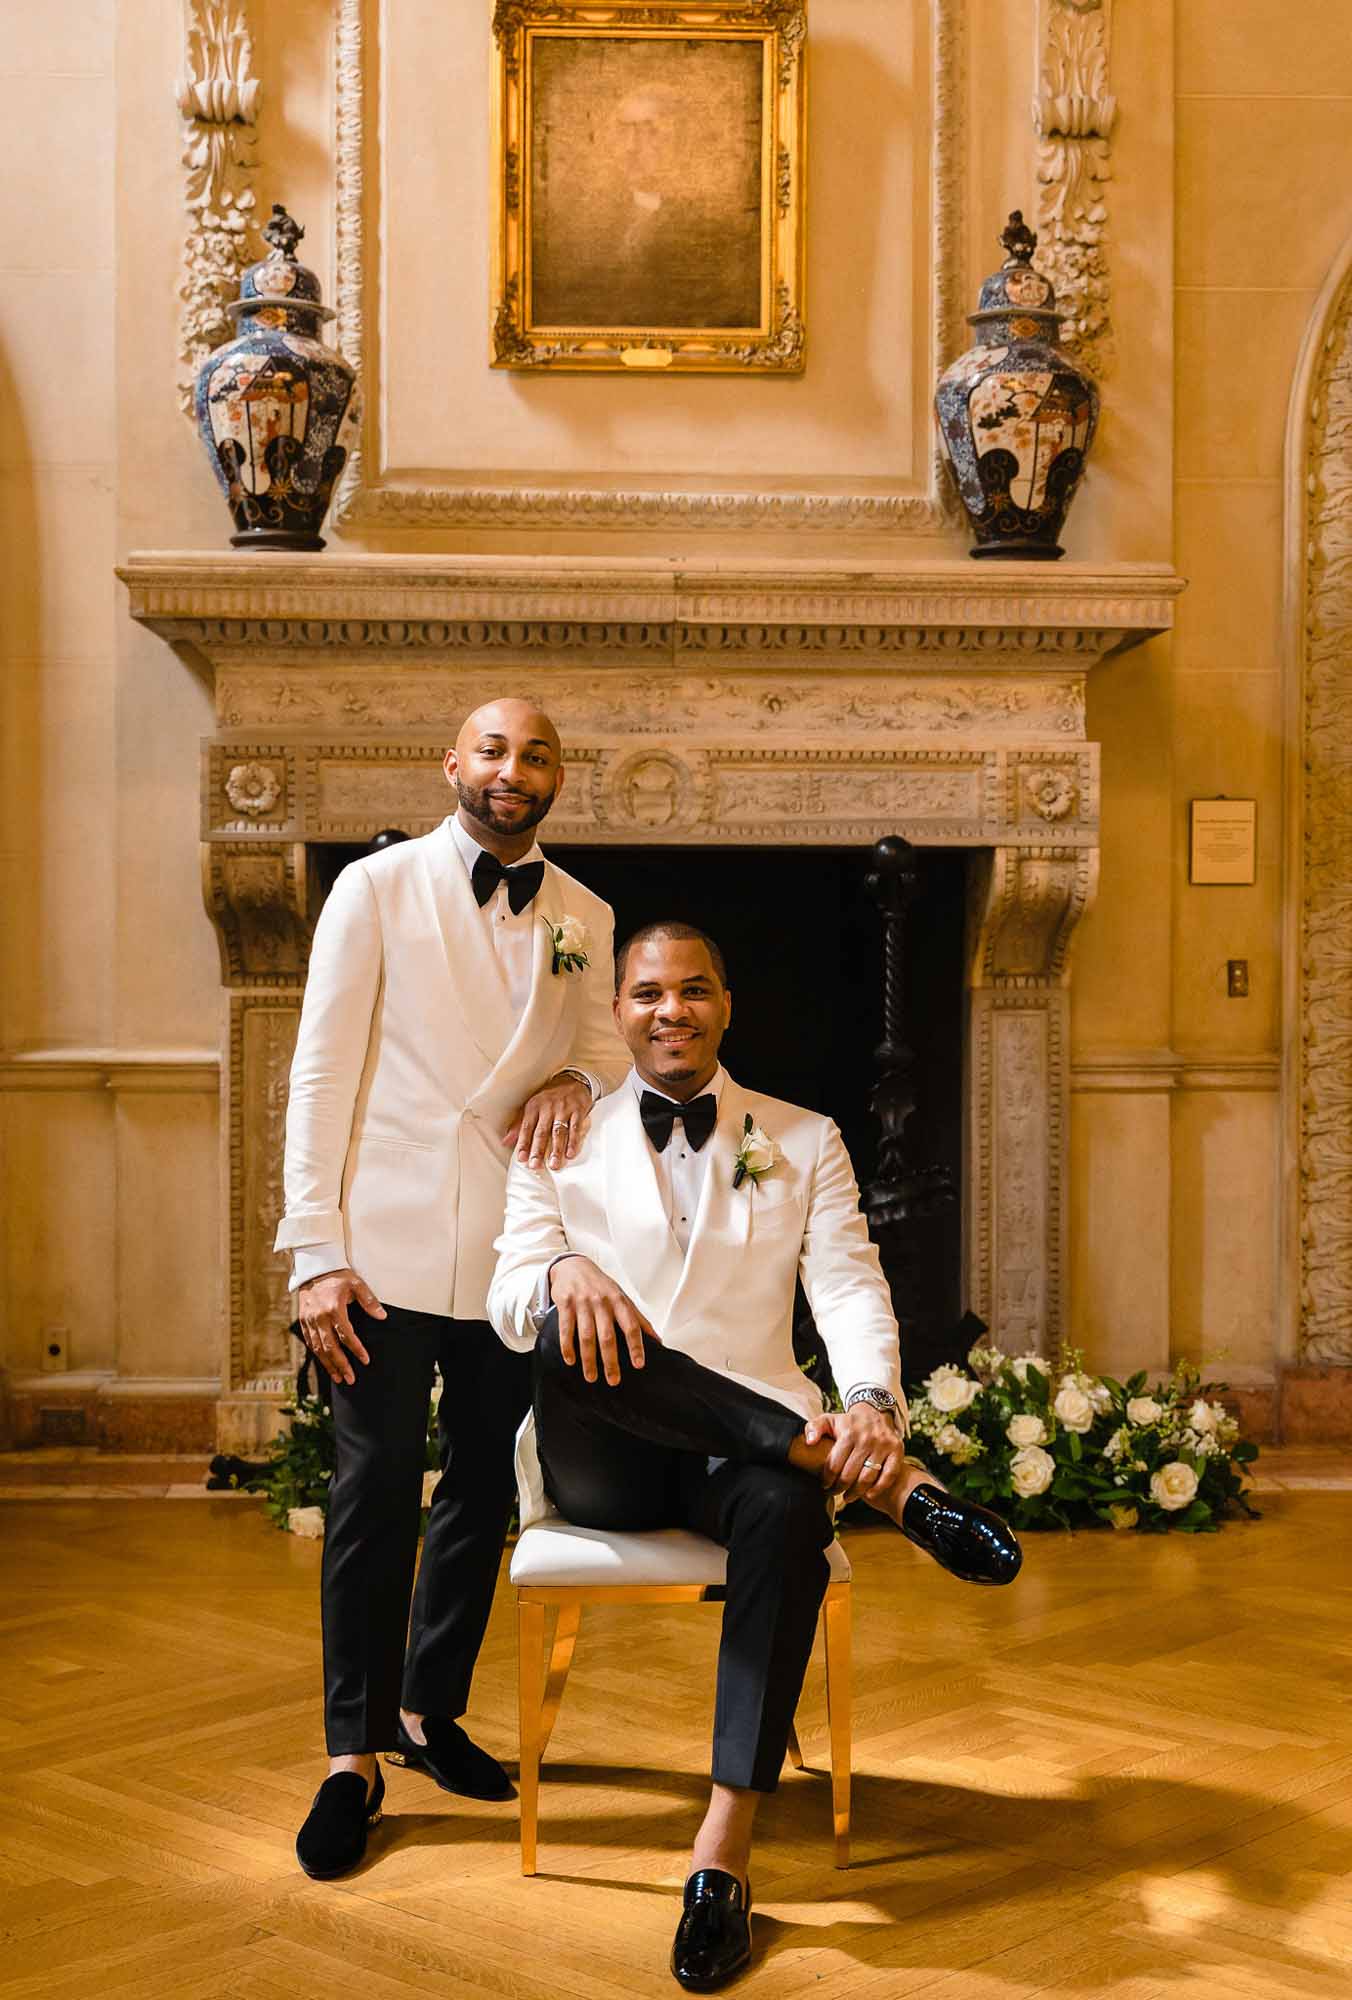 This couple transformed their home into a fabulous wedding venue | Myron Fields Photography | Featured on Equally Wed, the leading LGBTQ+ wedding magazine - grooms, white tuxedo